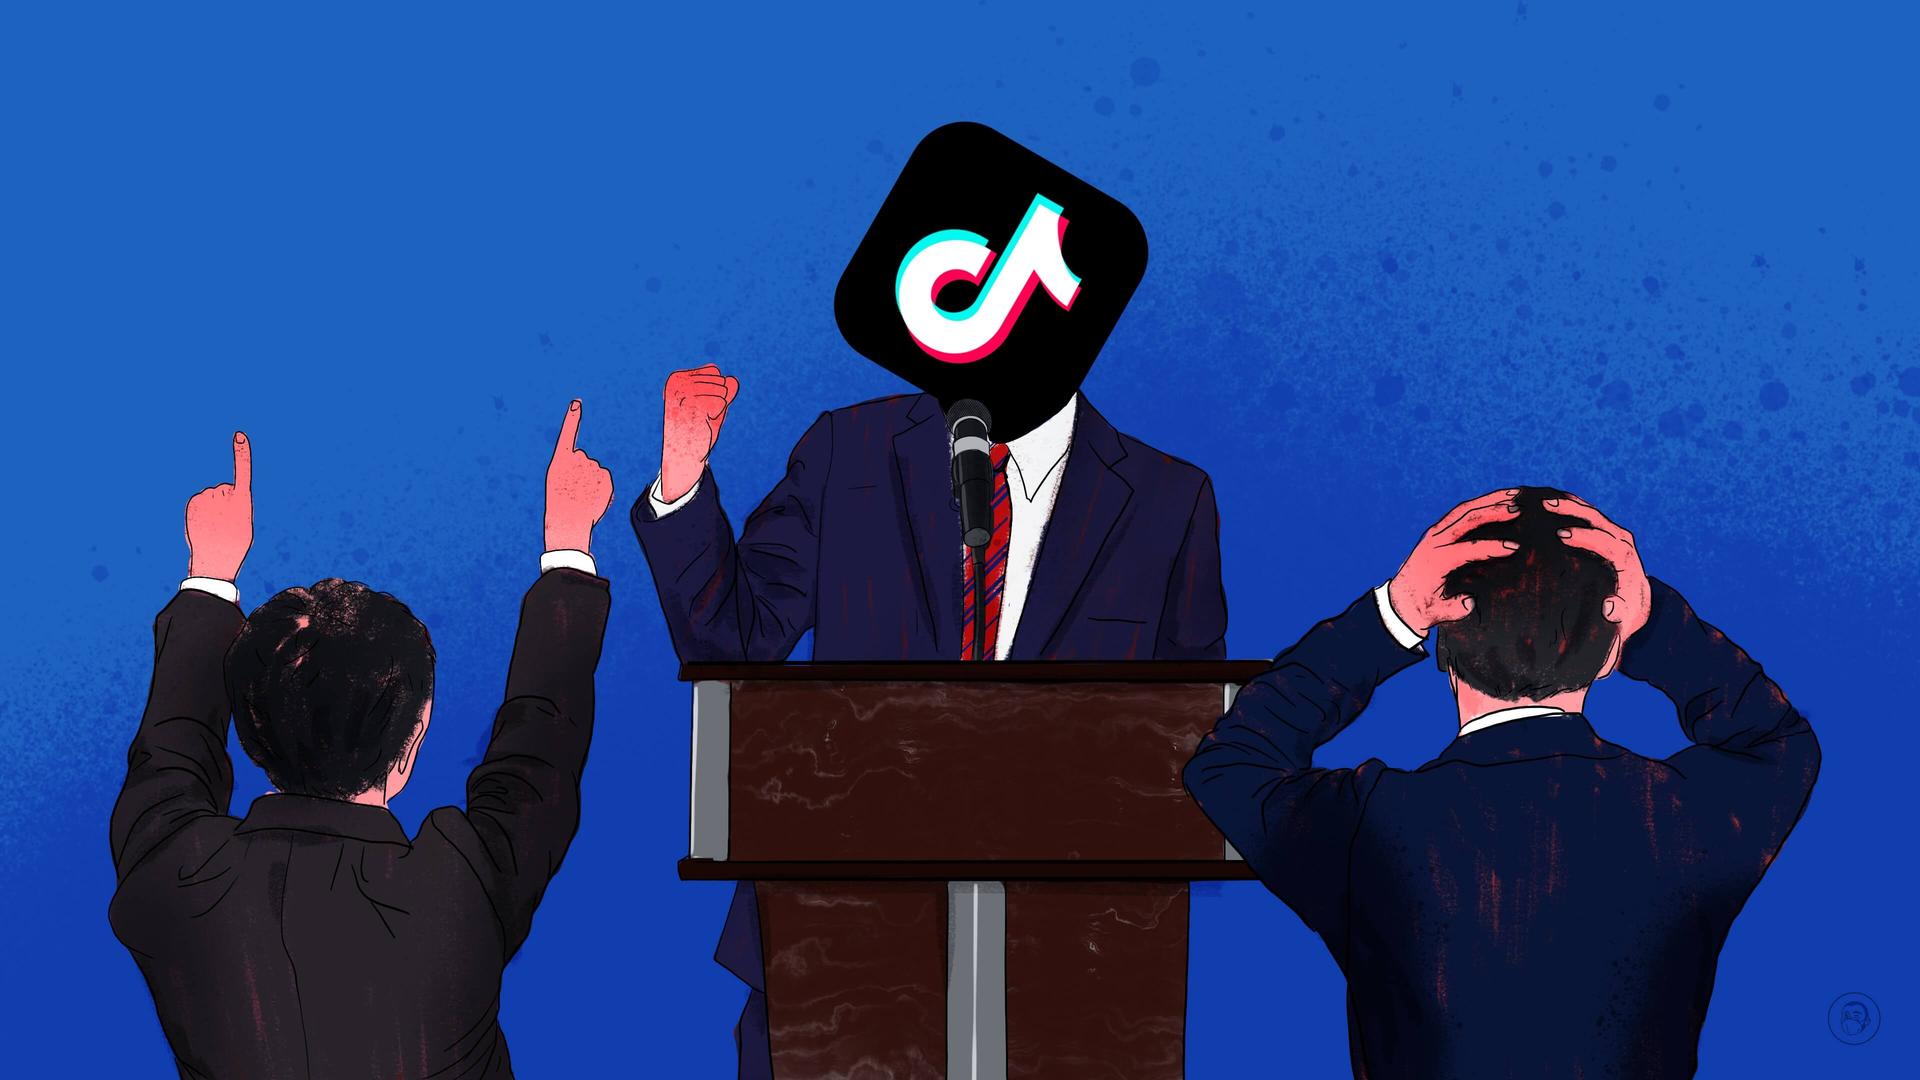 An illustration by Alex Santafe depicting a Tiktok spokesperson with a desperate and an excited members of the audience